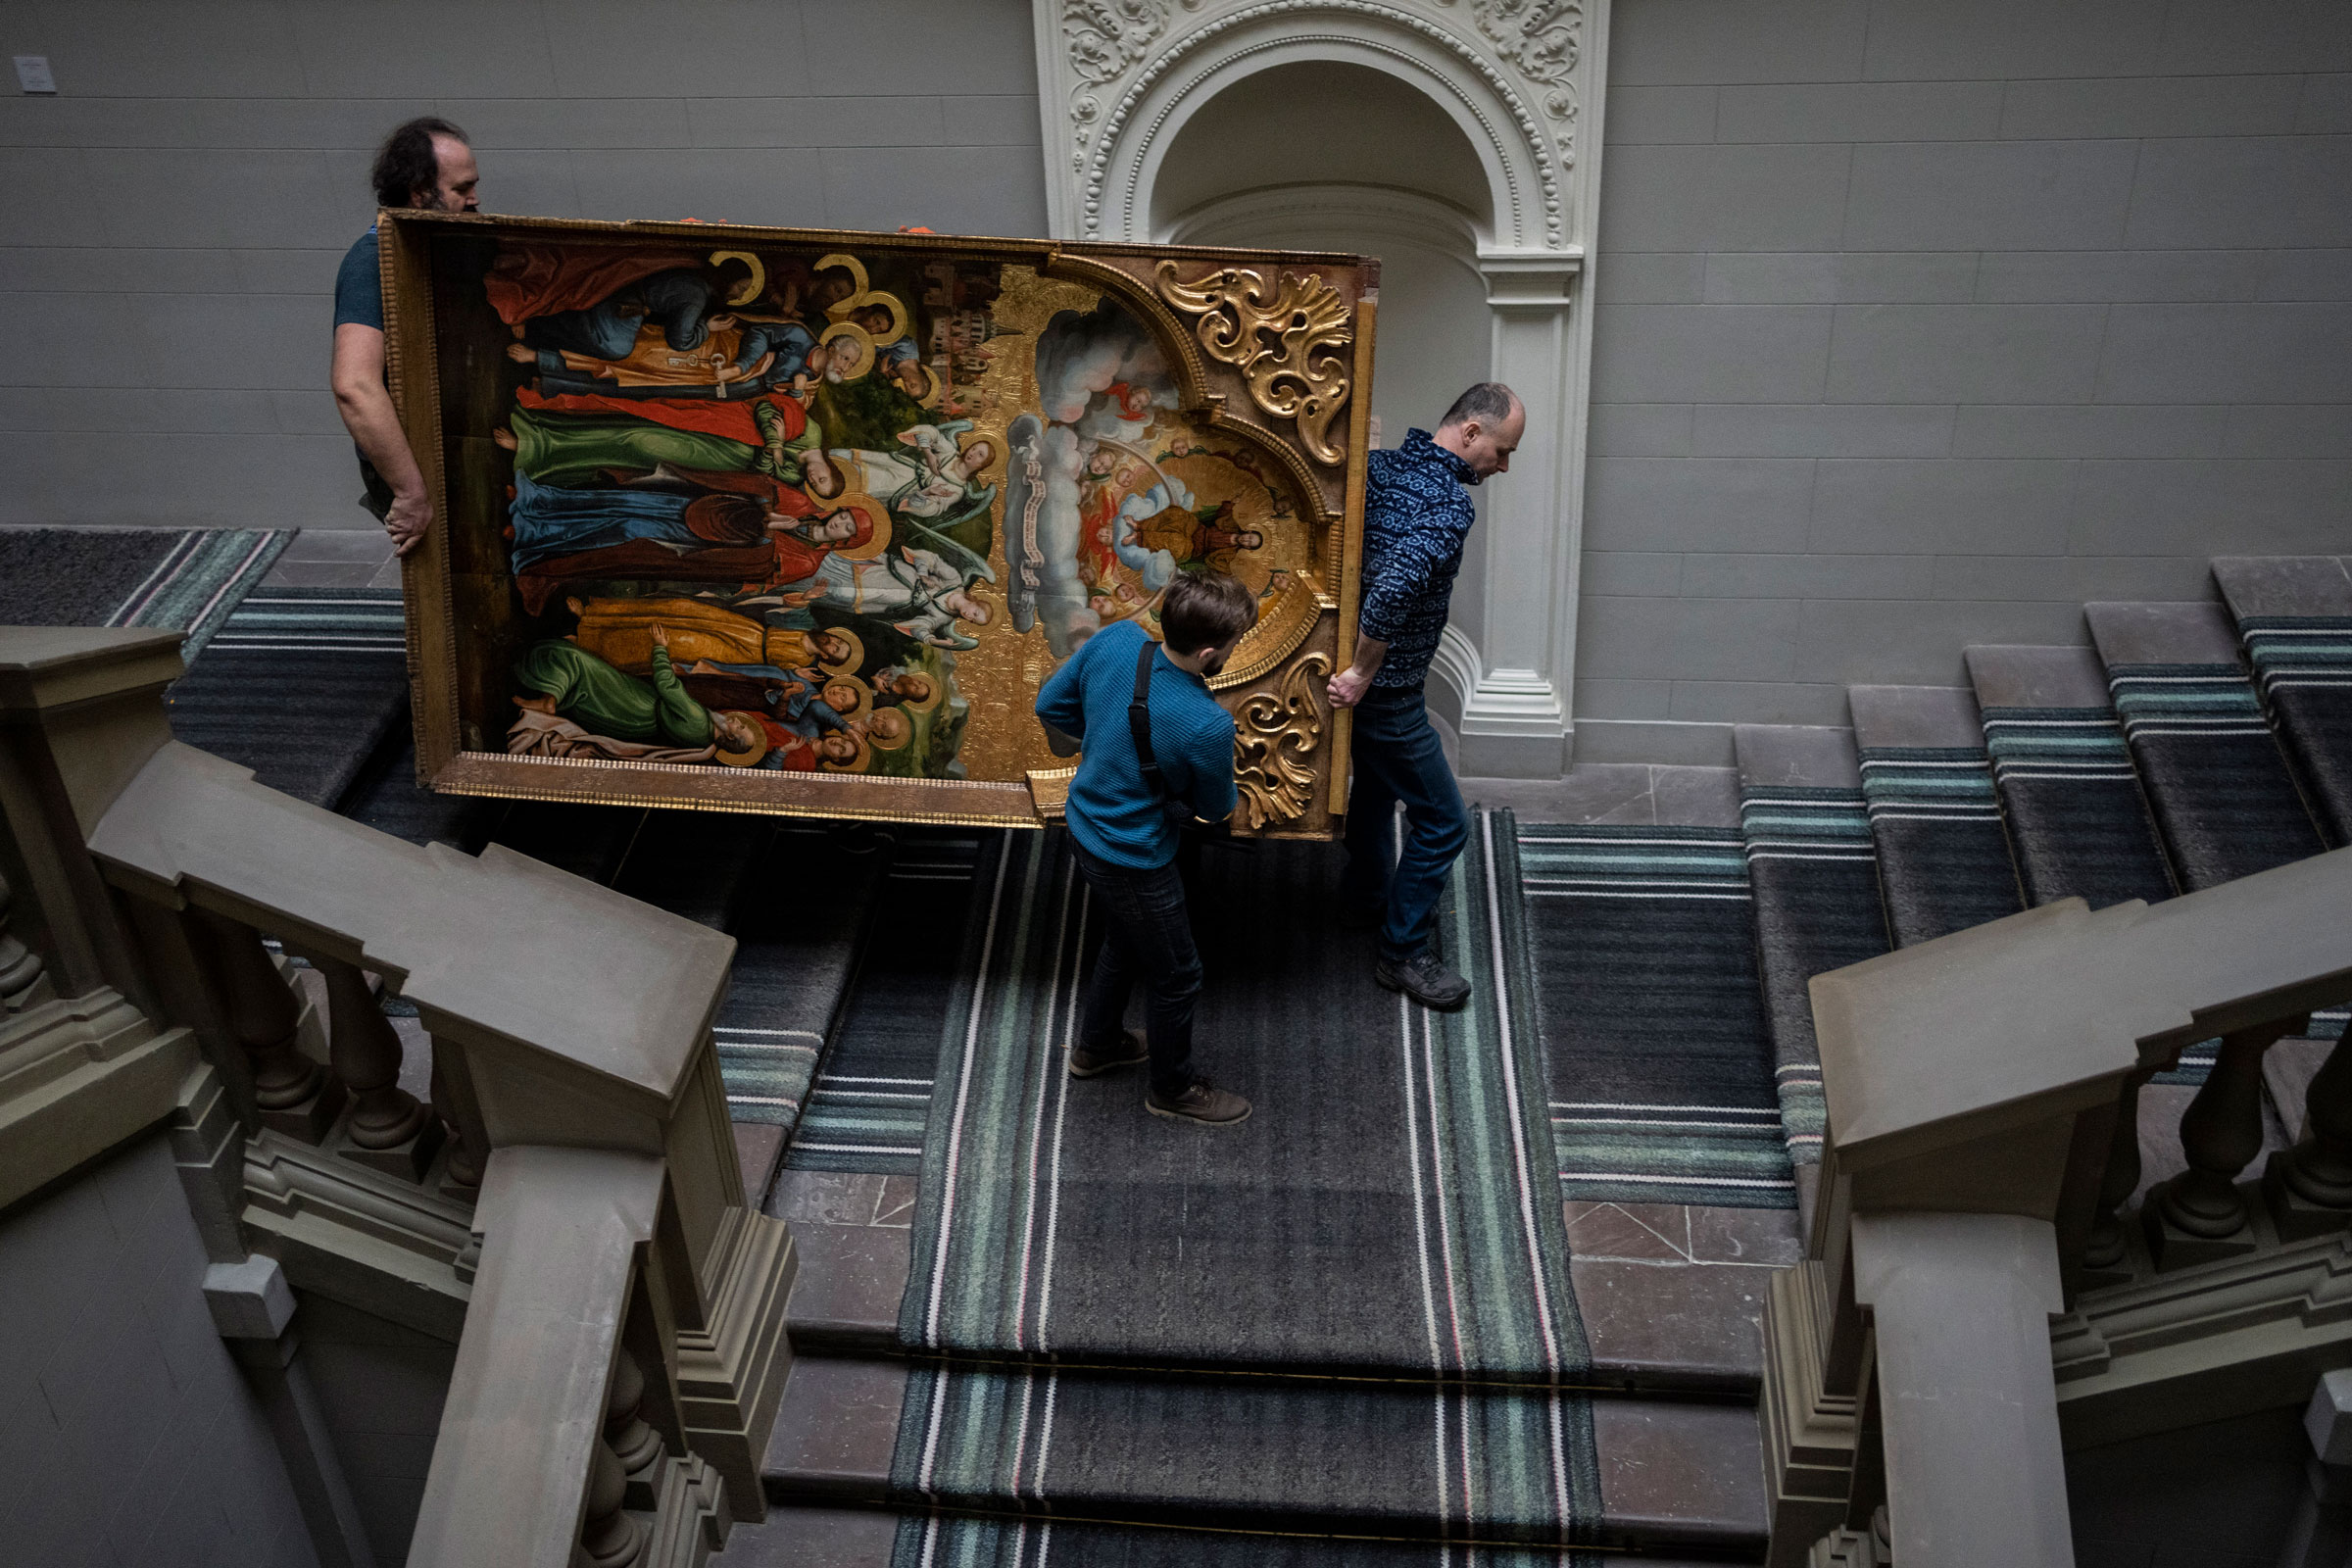 Workers move the Annunciation to the Blessed Virgin of the Bohorodchany Iconostasis in the Andrey Sheptytsky National Museum as part of safety preparations in the event of an attack in the western Ukrainian city of Lviv, on March 4, 2022. The doors of the museum have been closed since Russia’s war on Ukraine began on Feb. 24. (Bernat Armangue—AP)